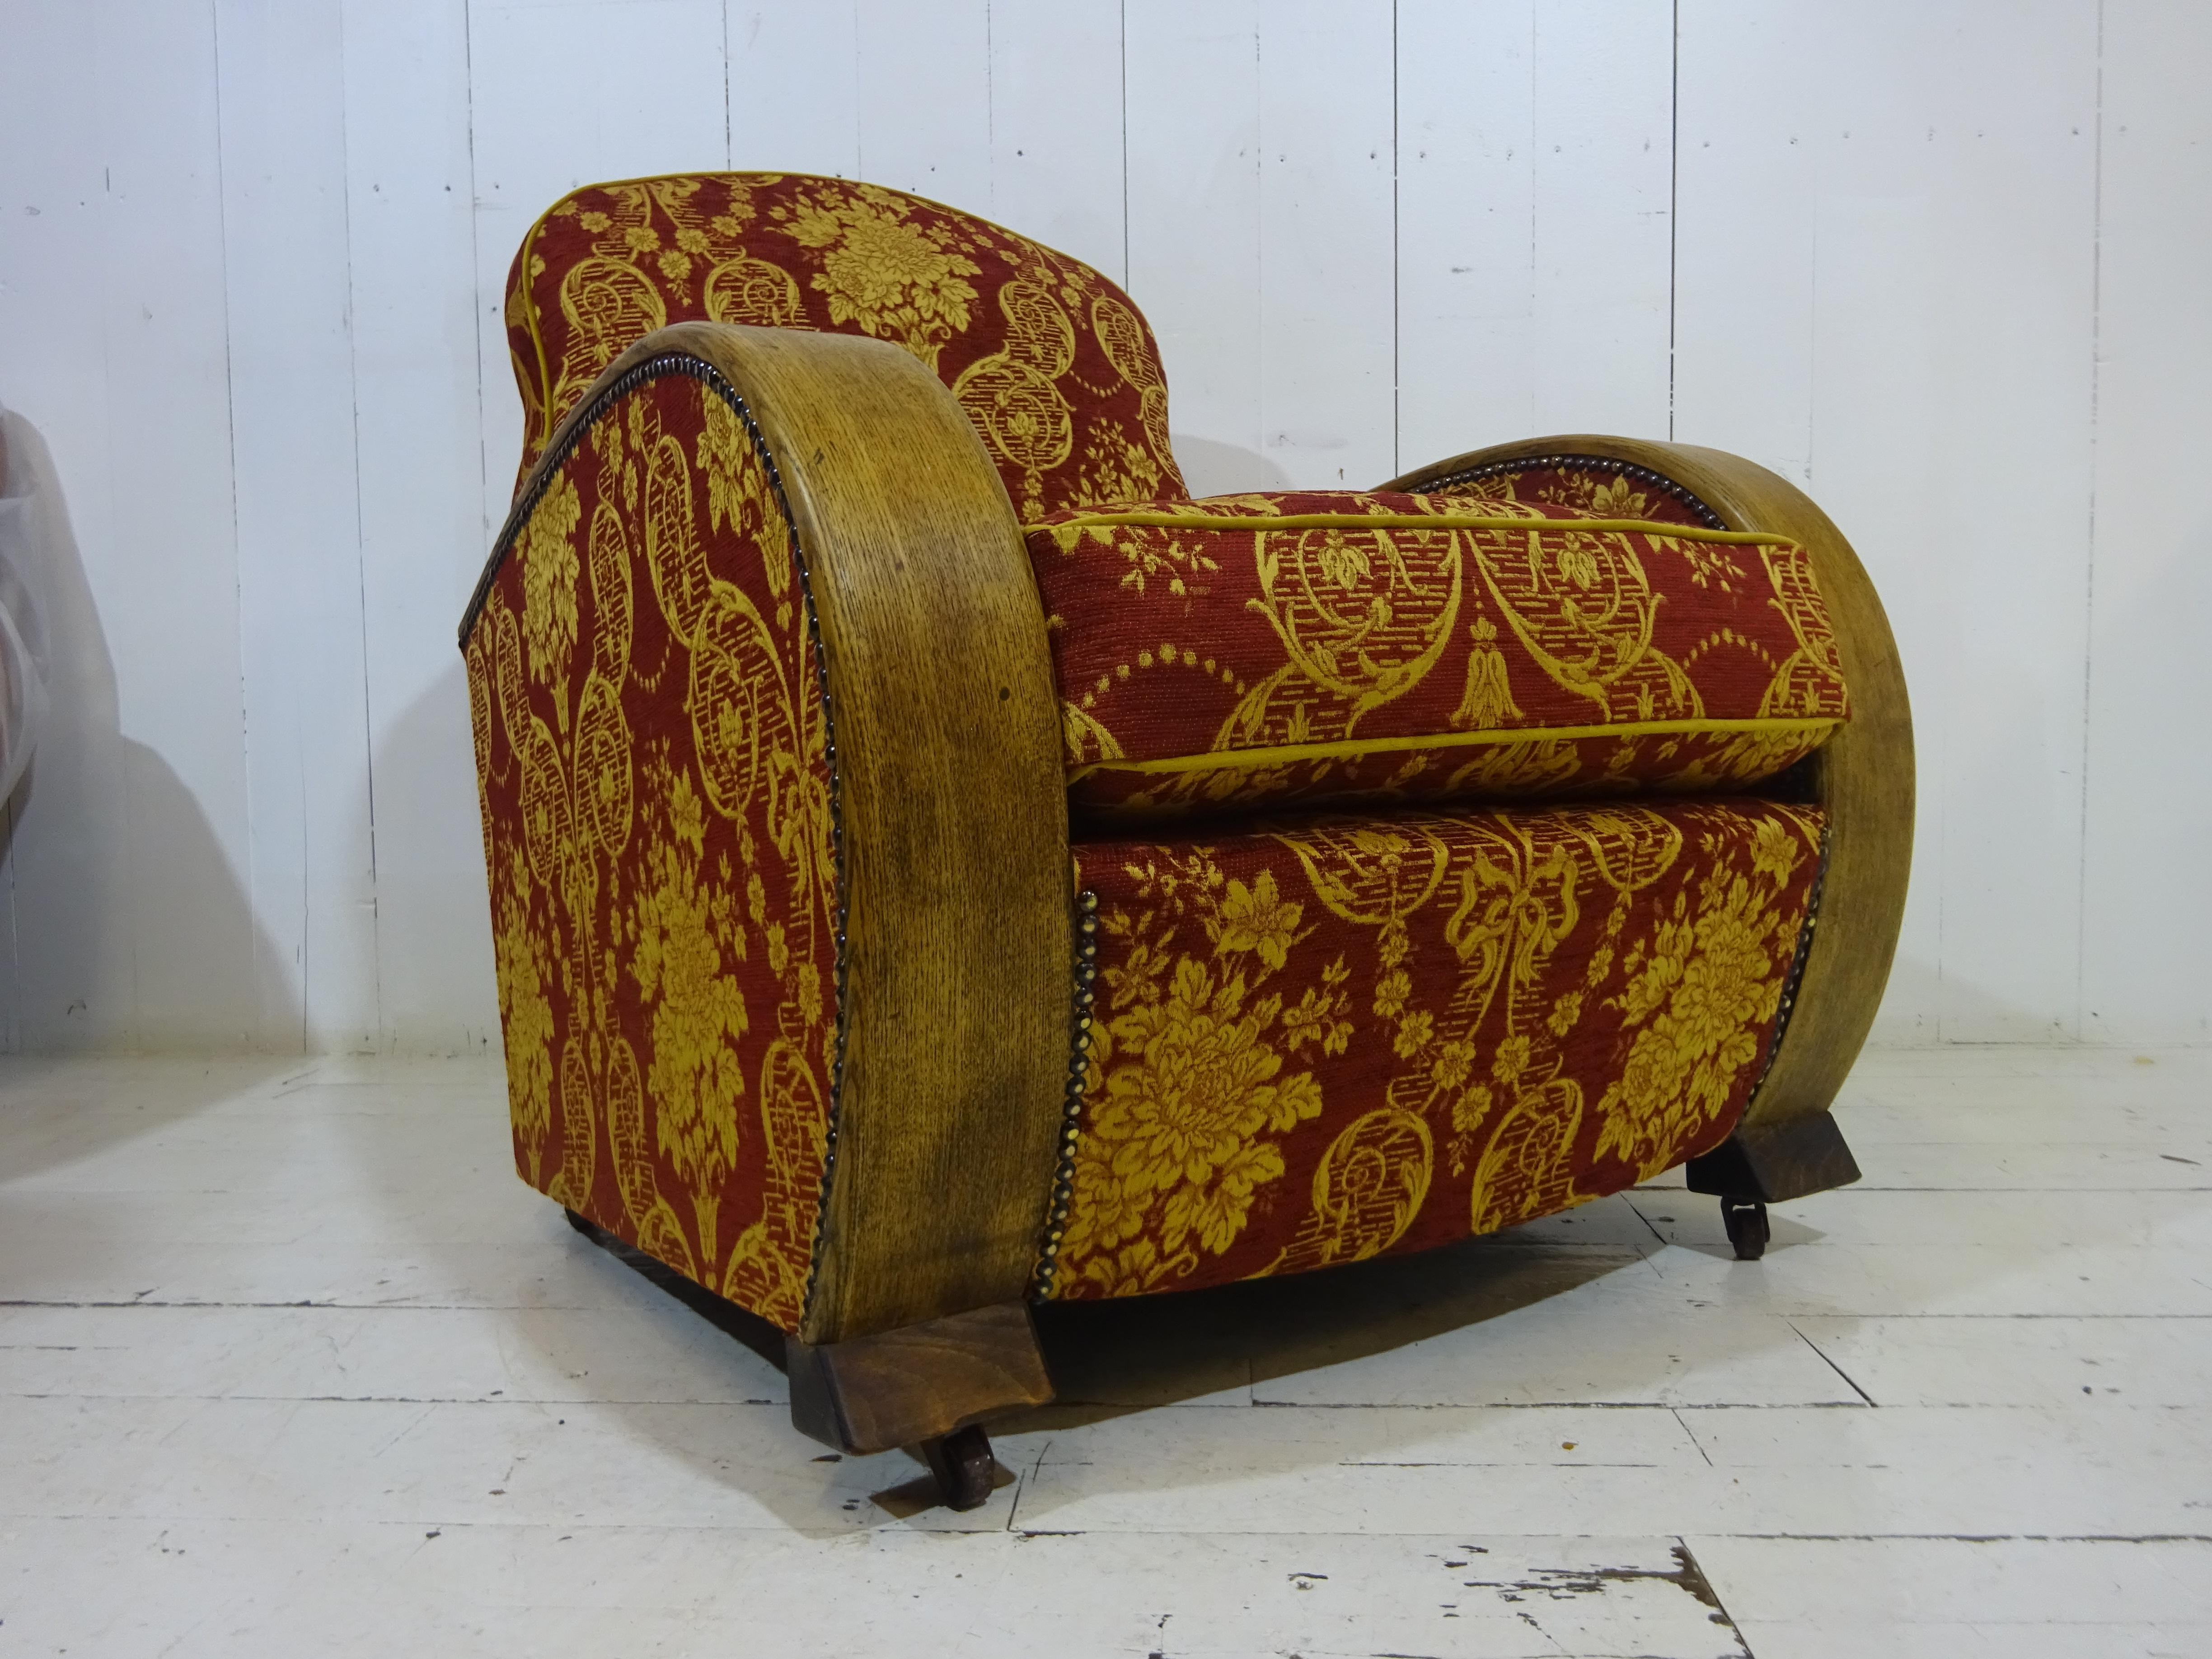 Art Deco Club Chair

A fabulous find by the team at the Rare Chair Company.

The chair is an original 1930's Art Deco club chair dated circa 1935 and thought to originate from Argentina. The quality of the chair is absolutely stunning. 

Solid beech